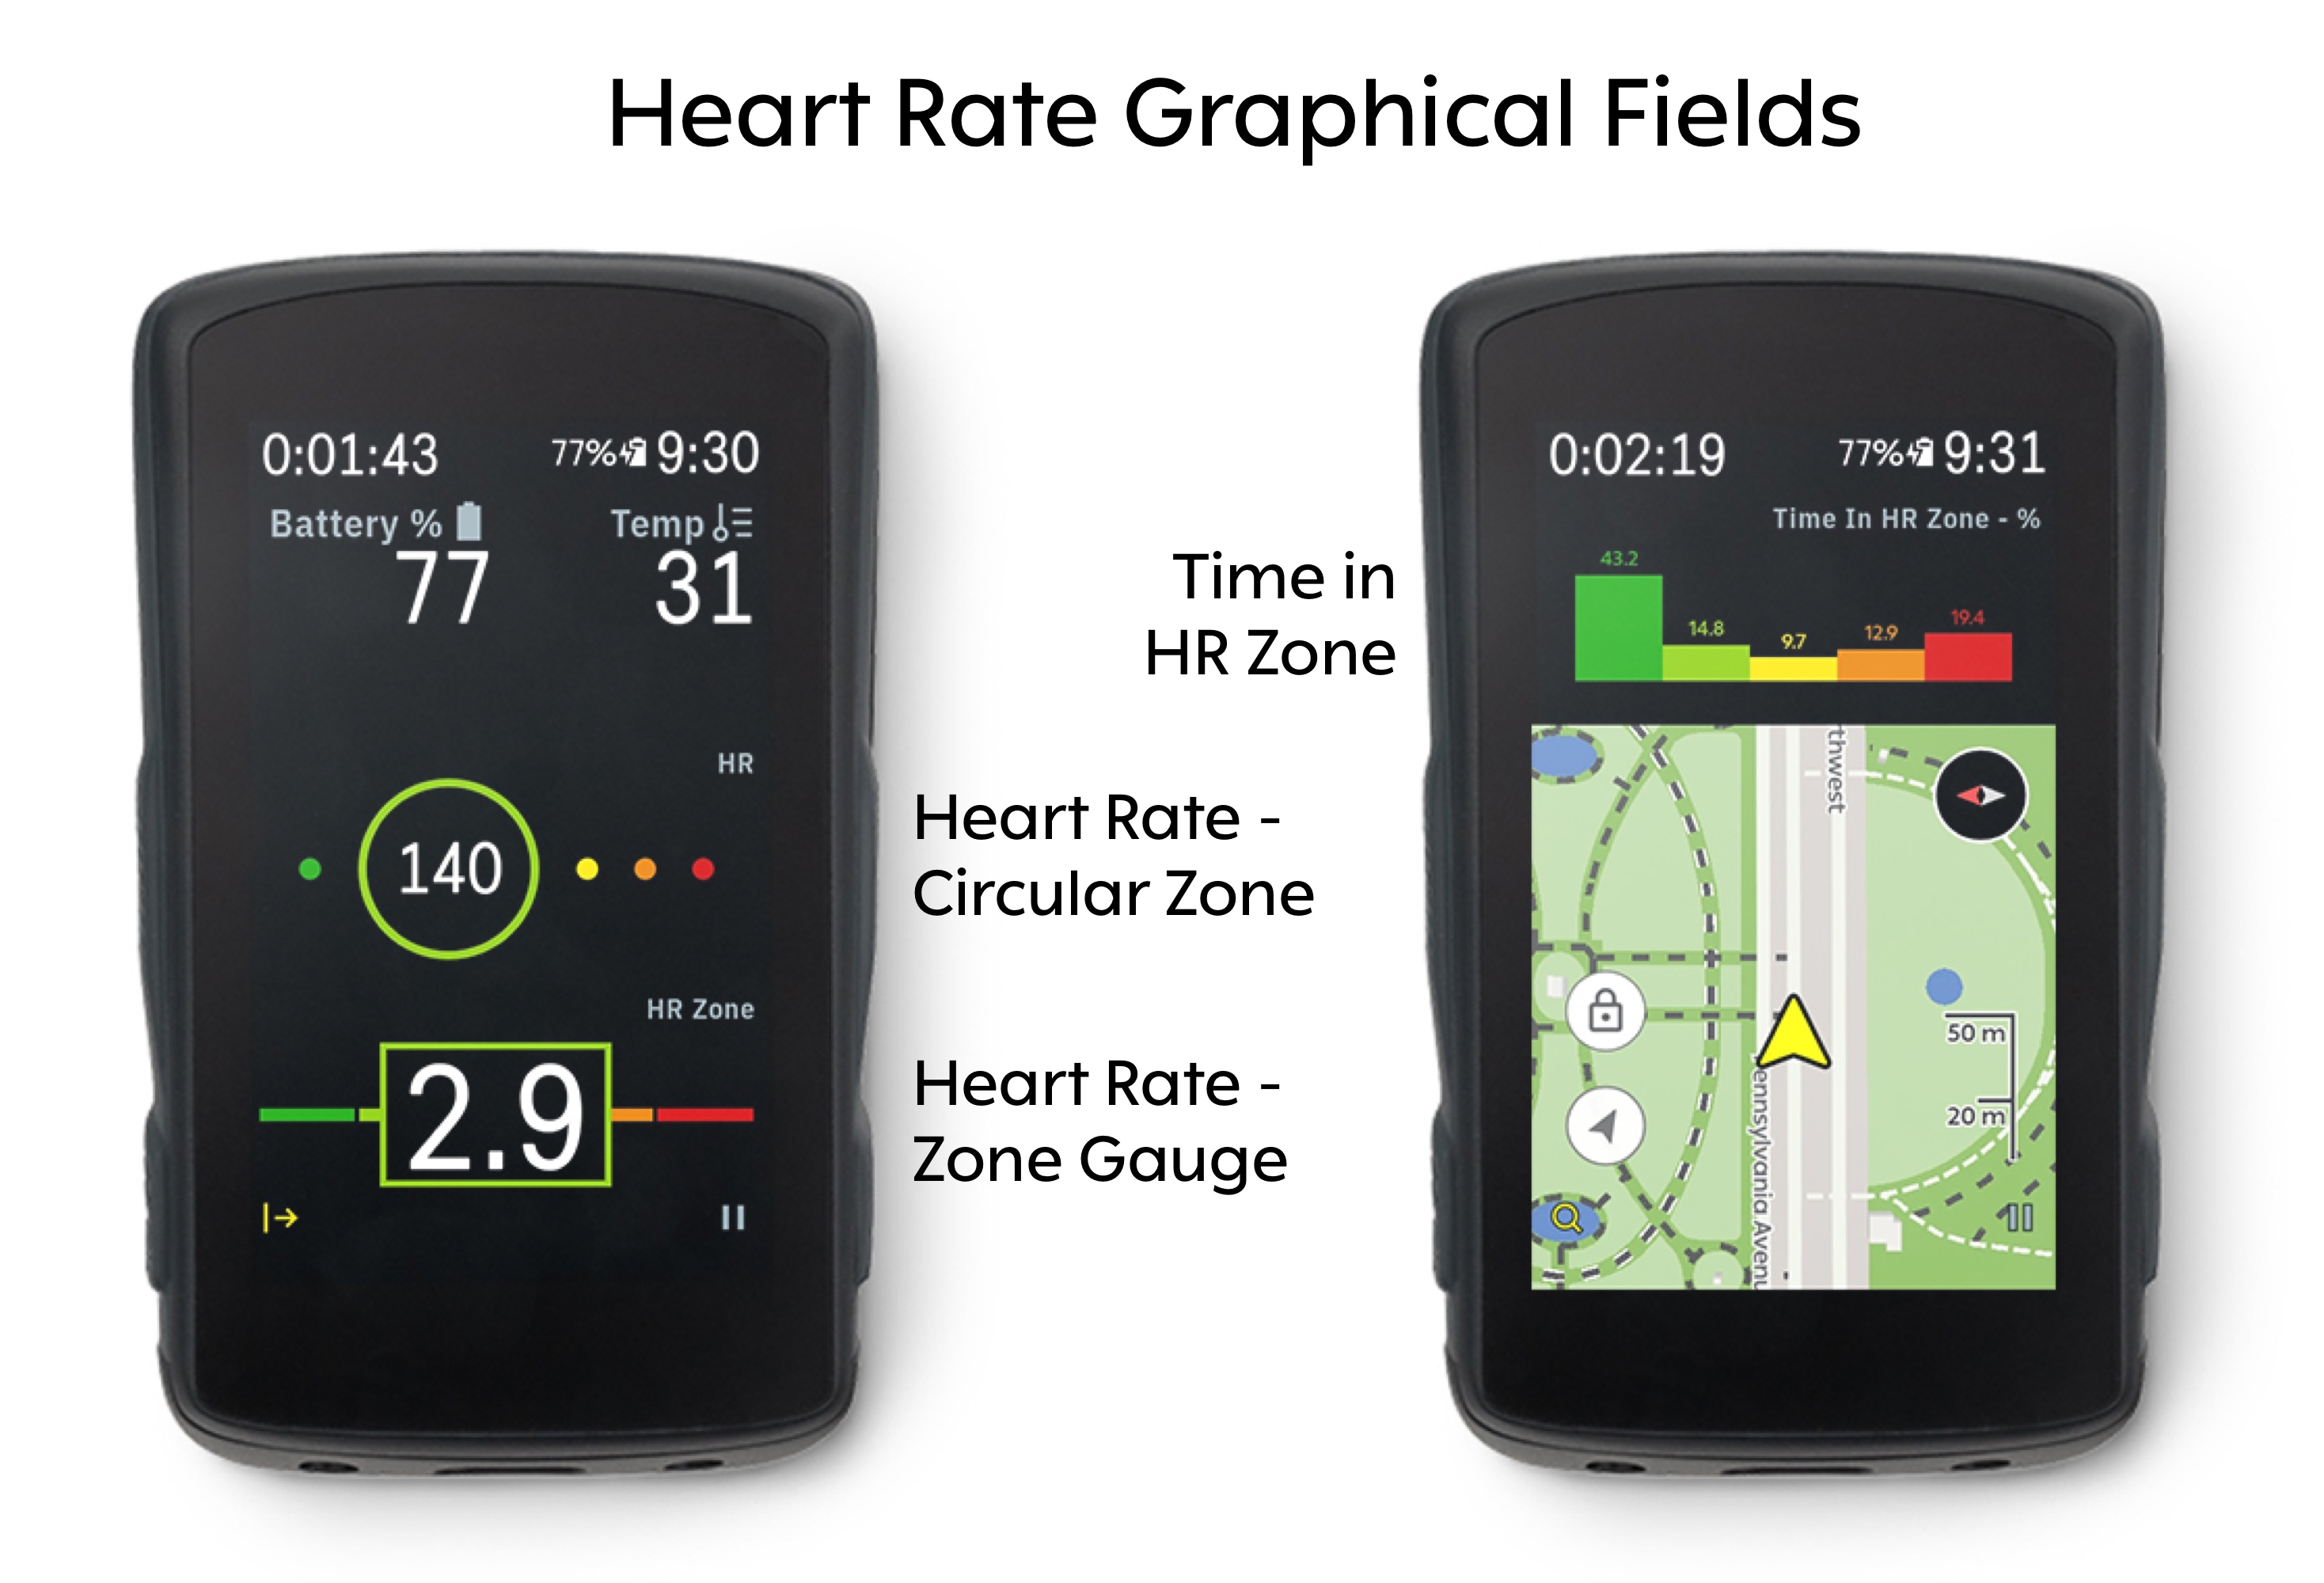 Heart_Rate_Graphical_Fields.jpg